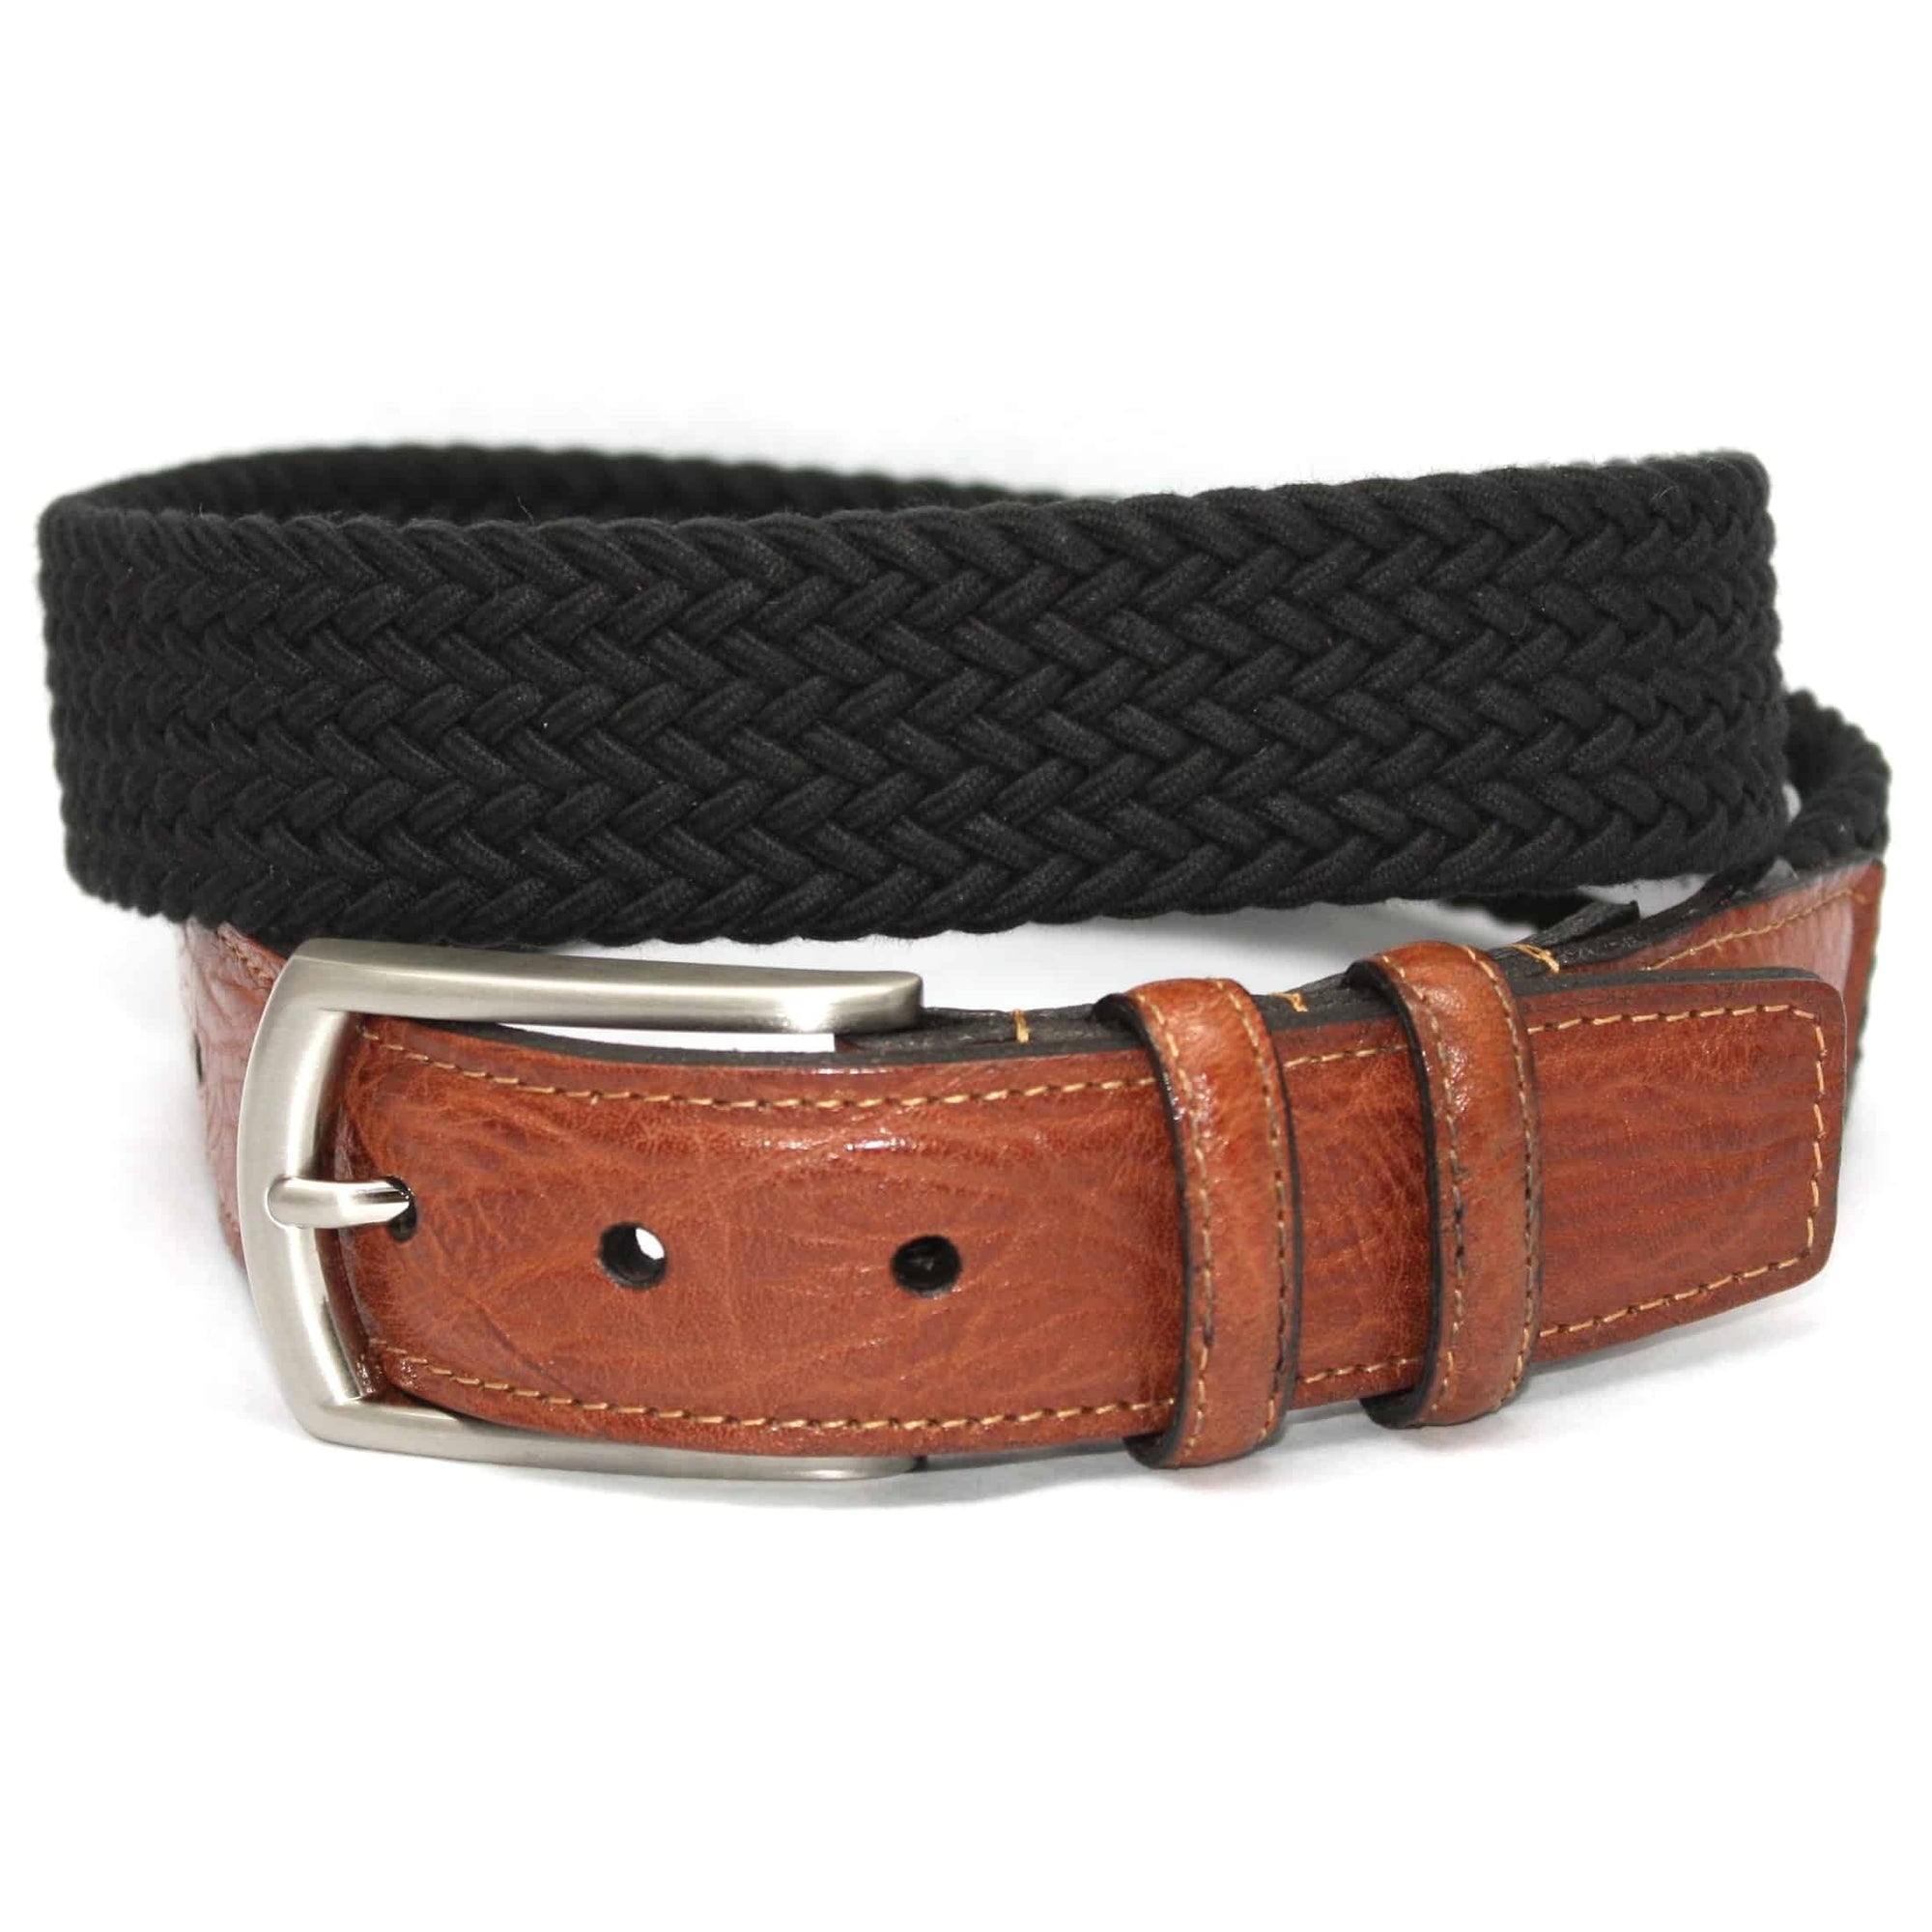 Italian Woven Cotton Elastic Belt in Black by Torino Leather